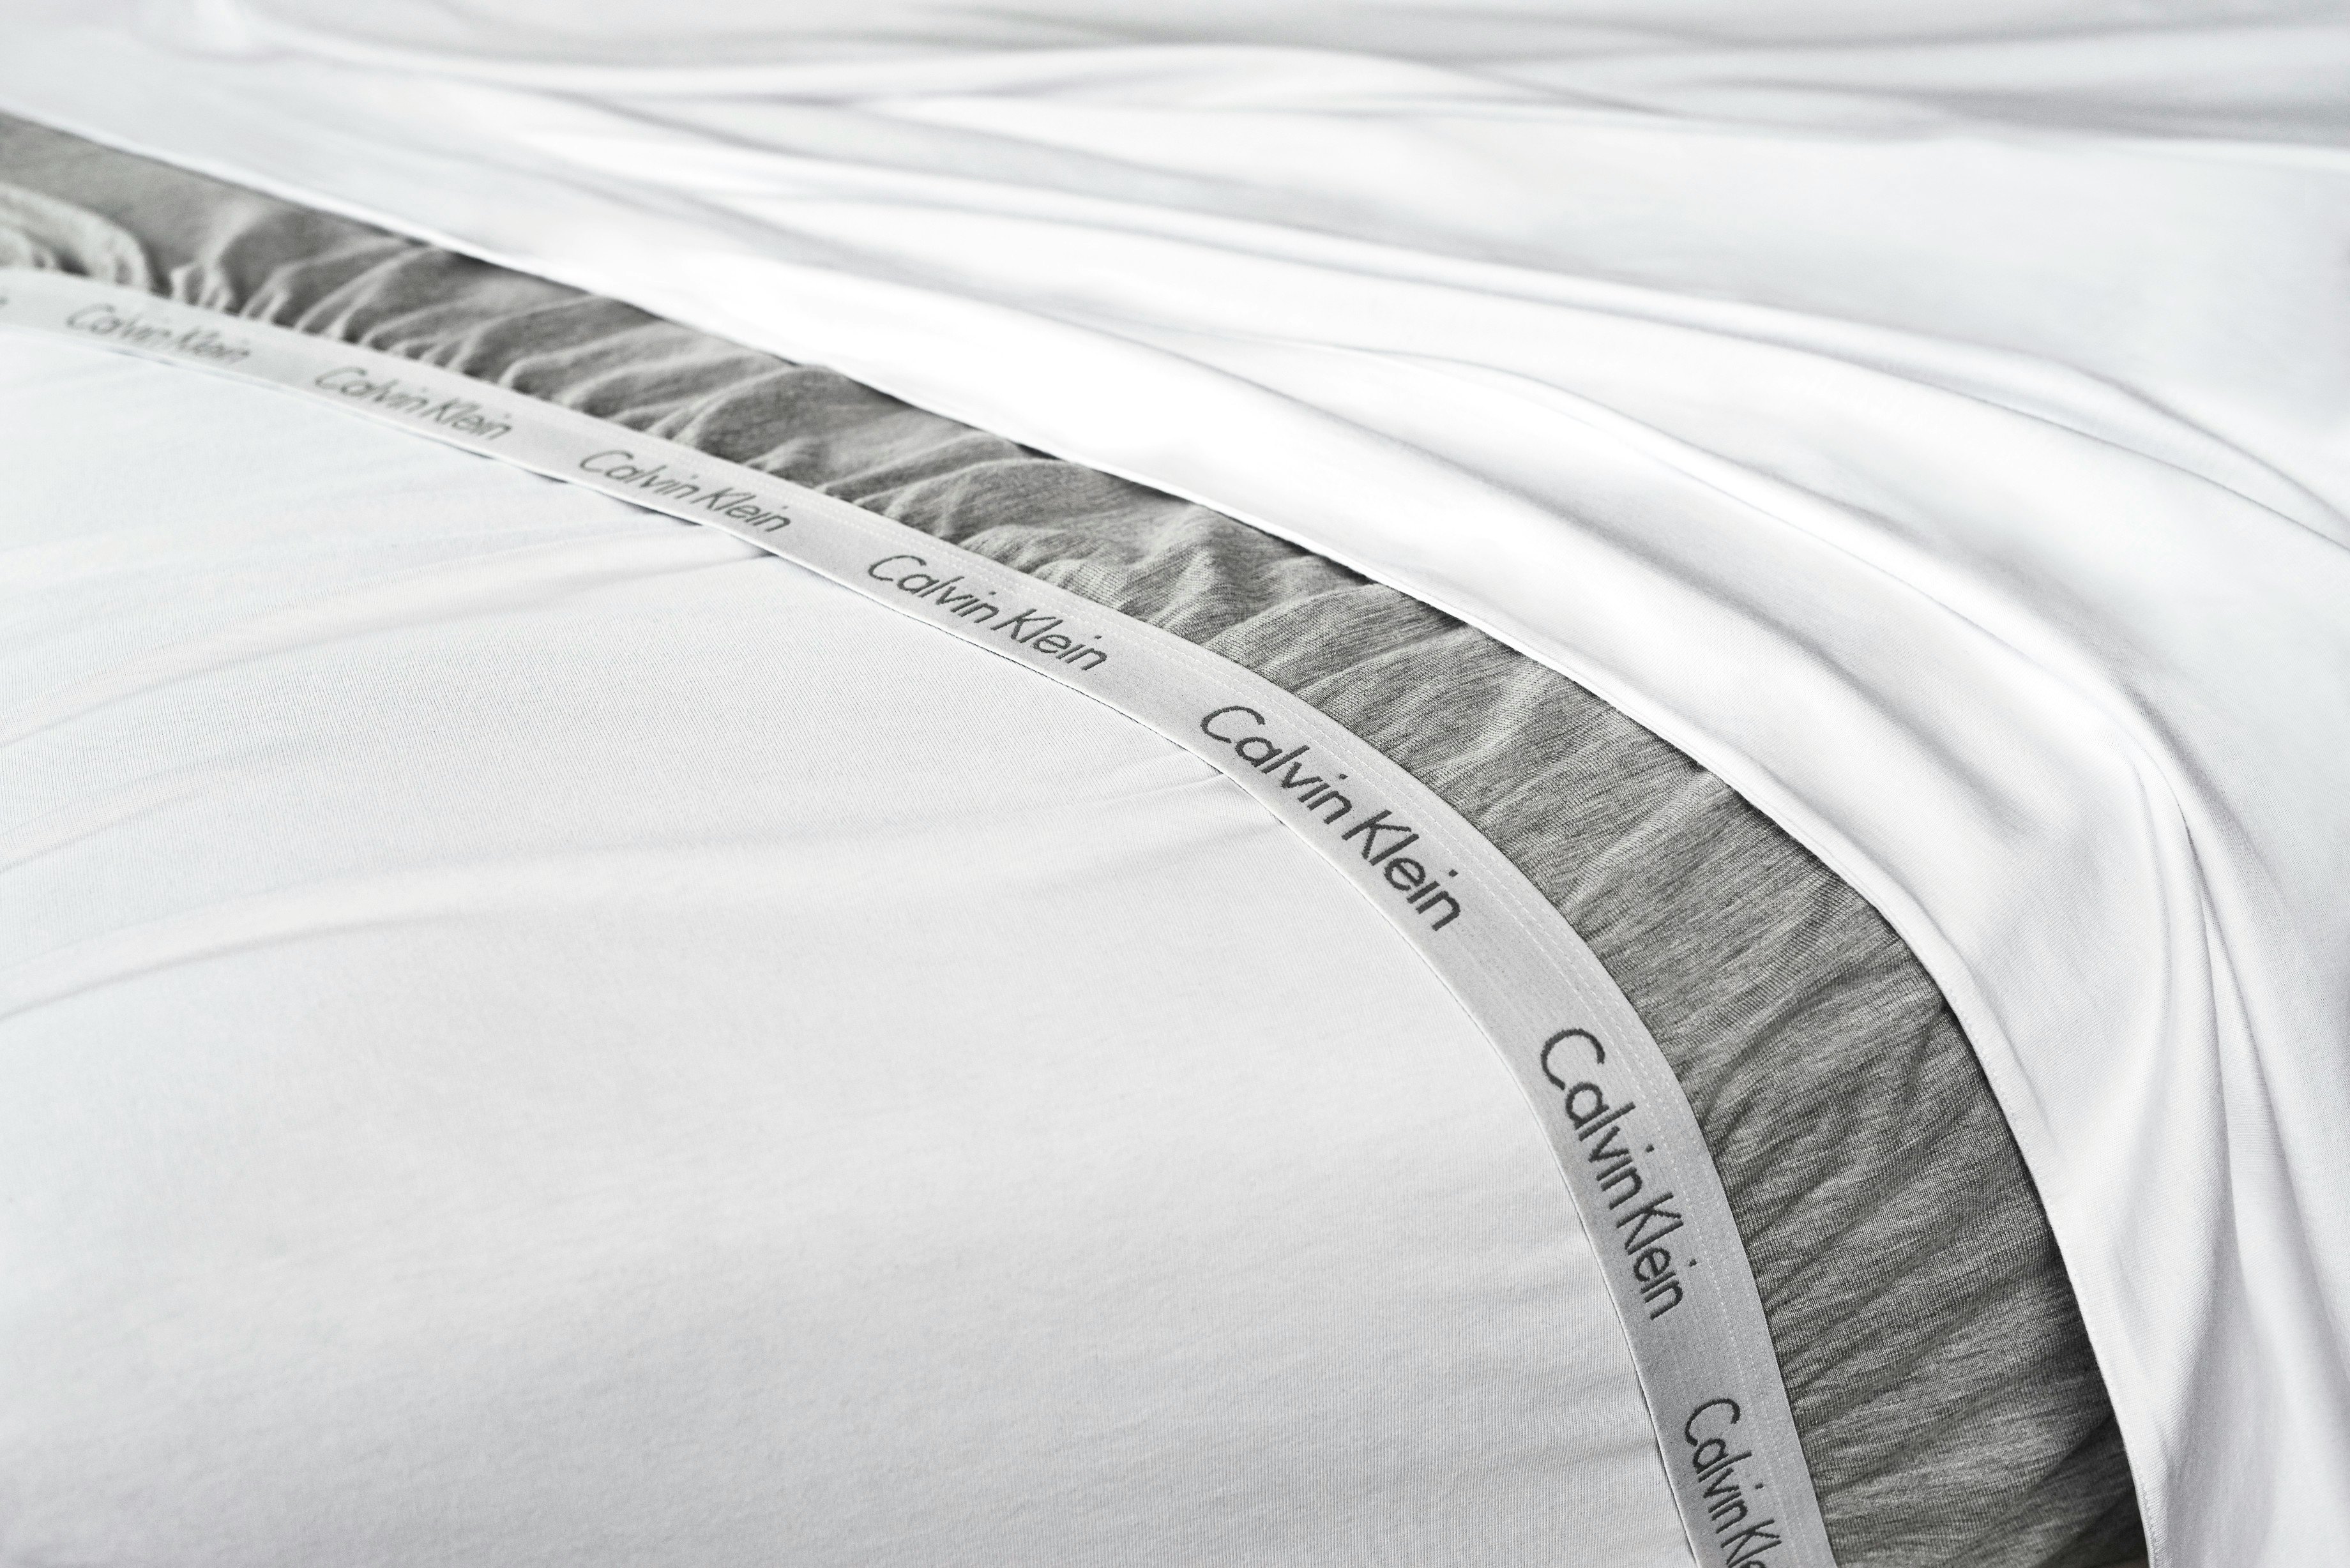 Calvin Klein Has Just Launched The Modern Cotton Bedding Collection